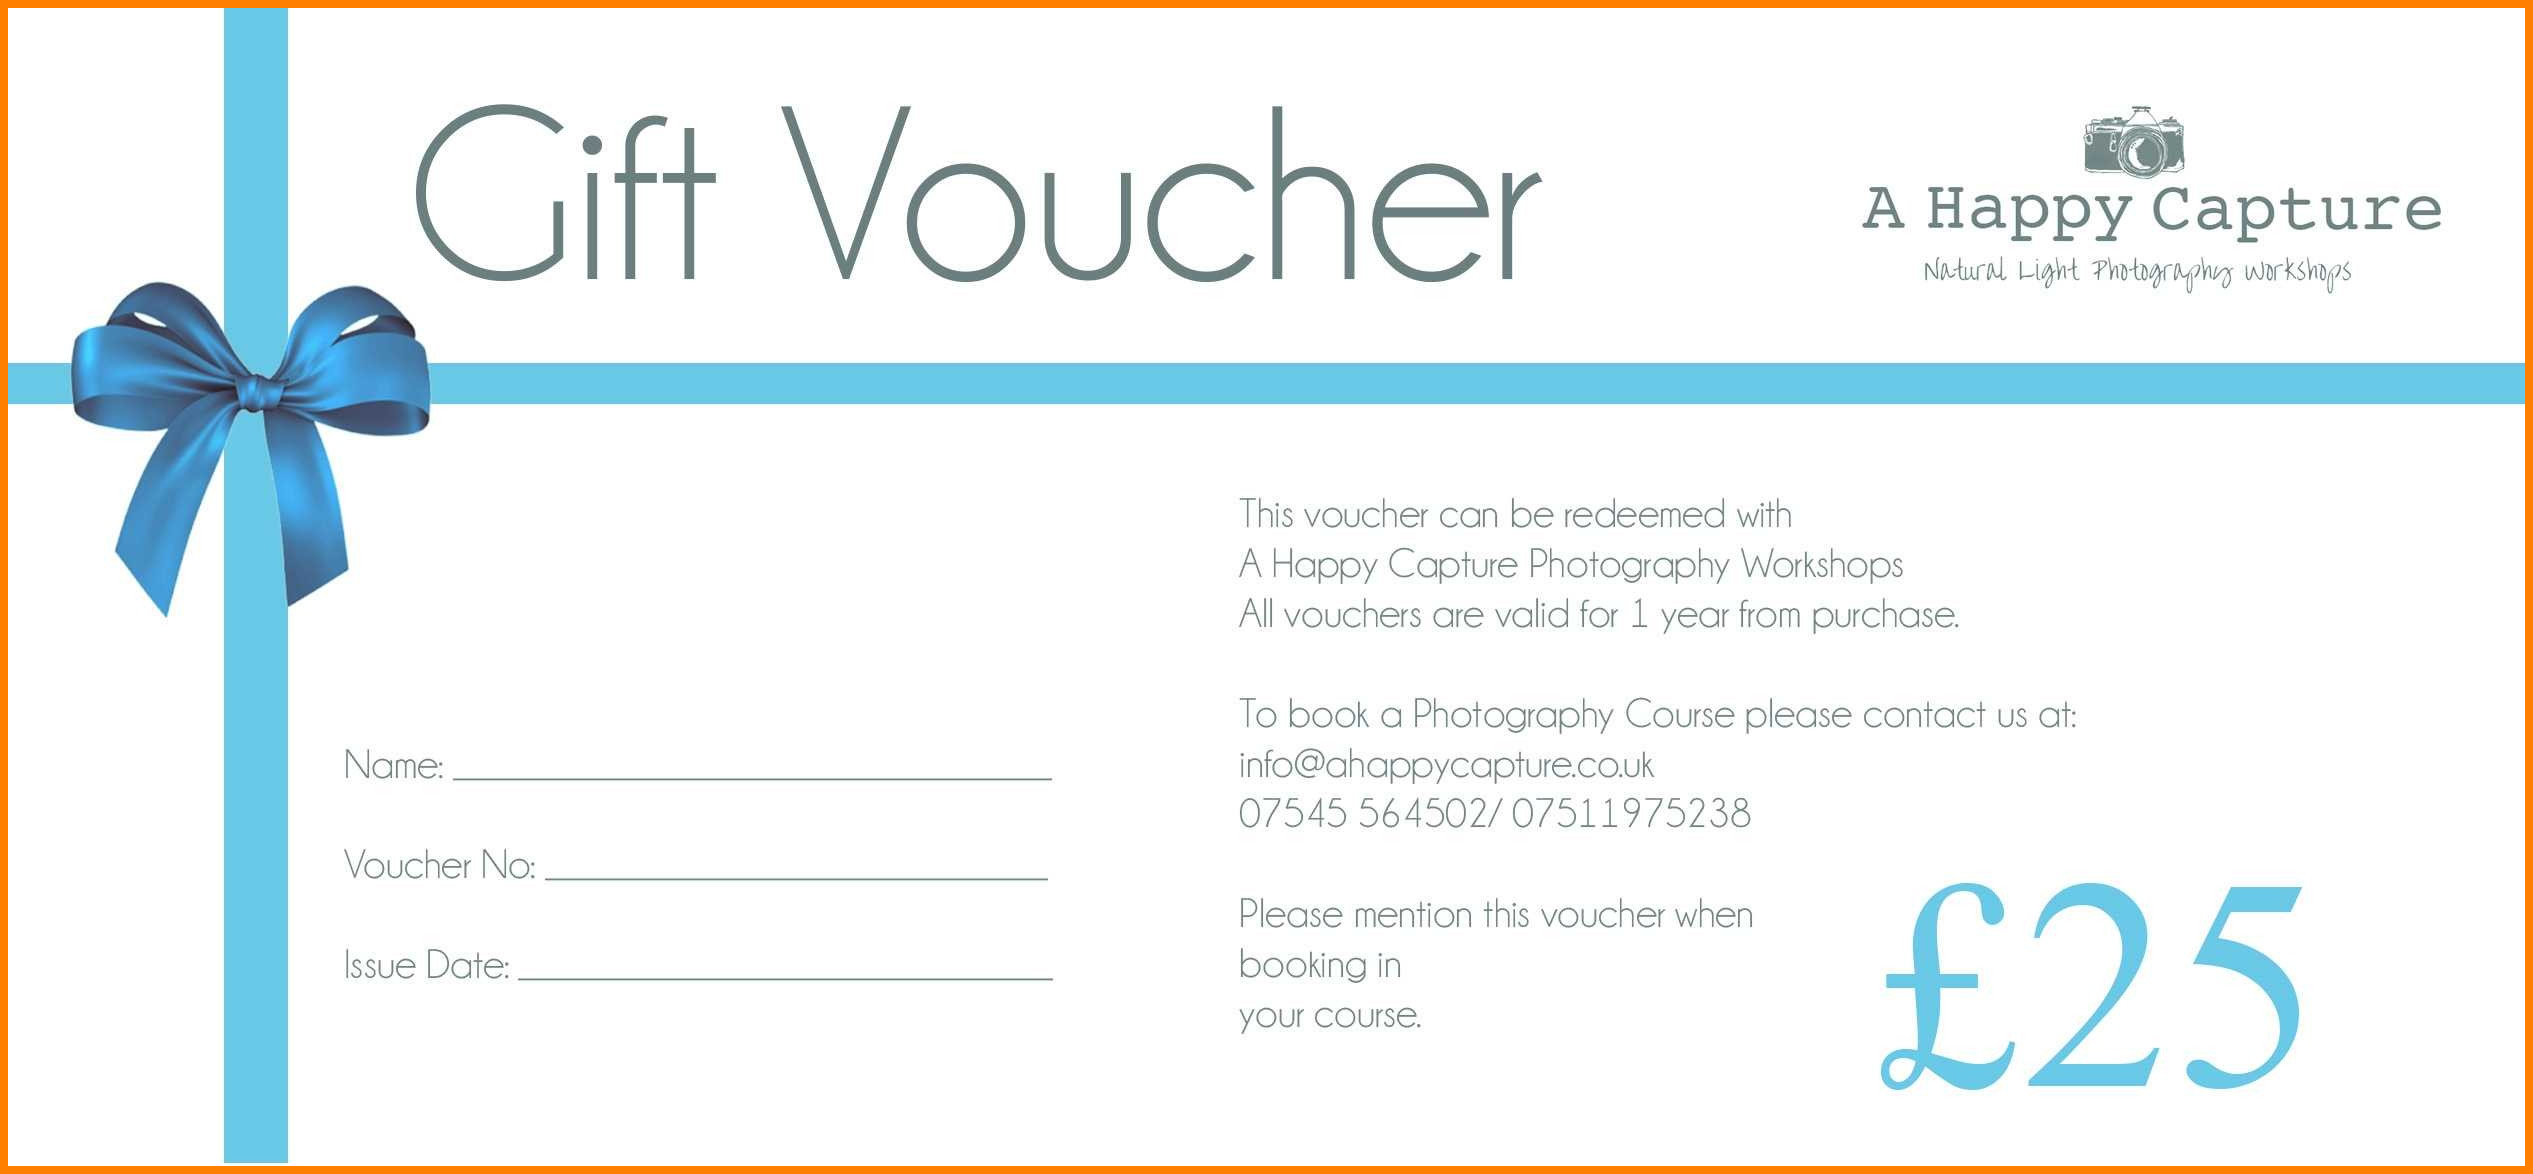 9+ Gift Voucher Sample Template | Pear Tree Digital With Restaurant Gift Certificate Template